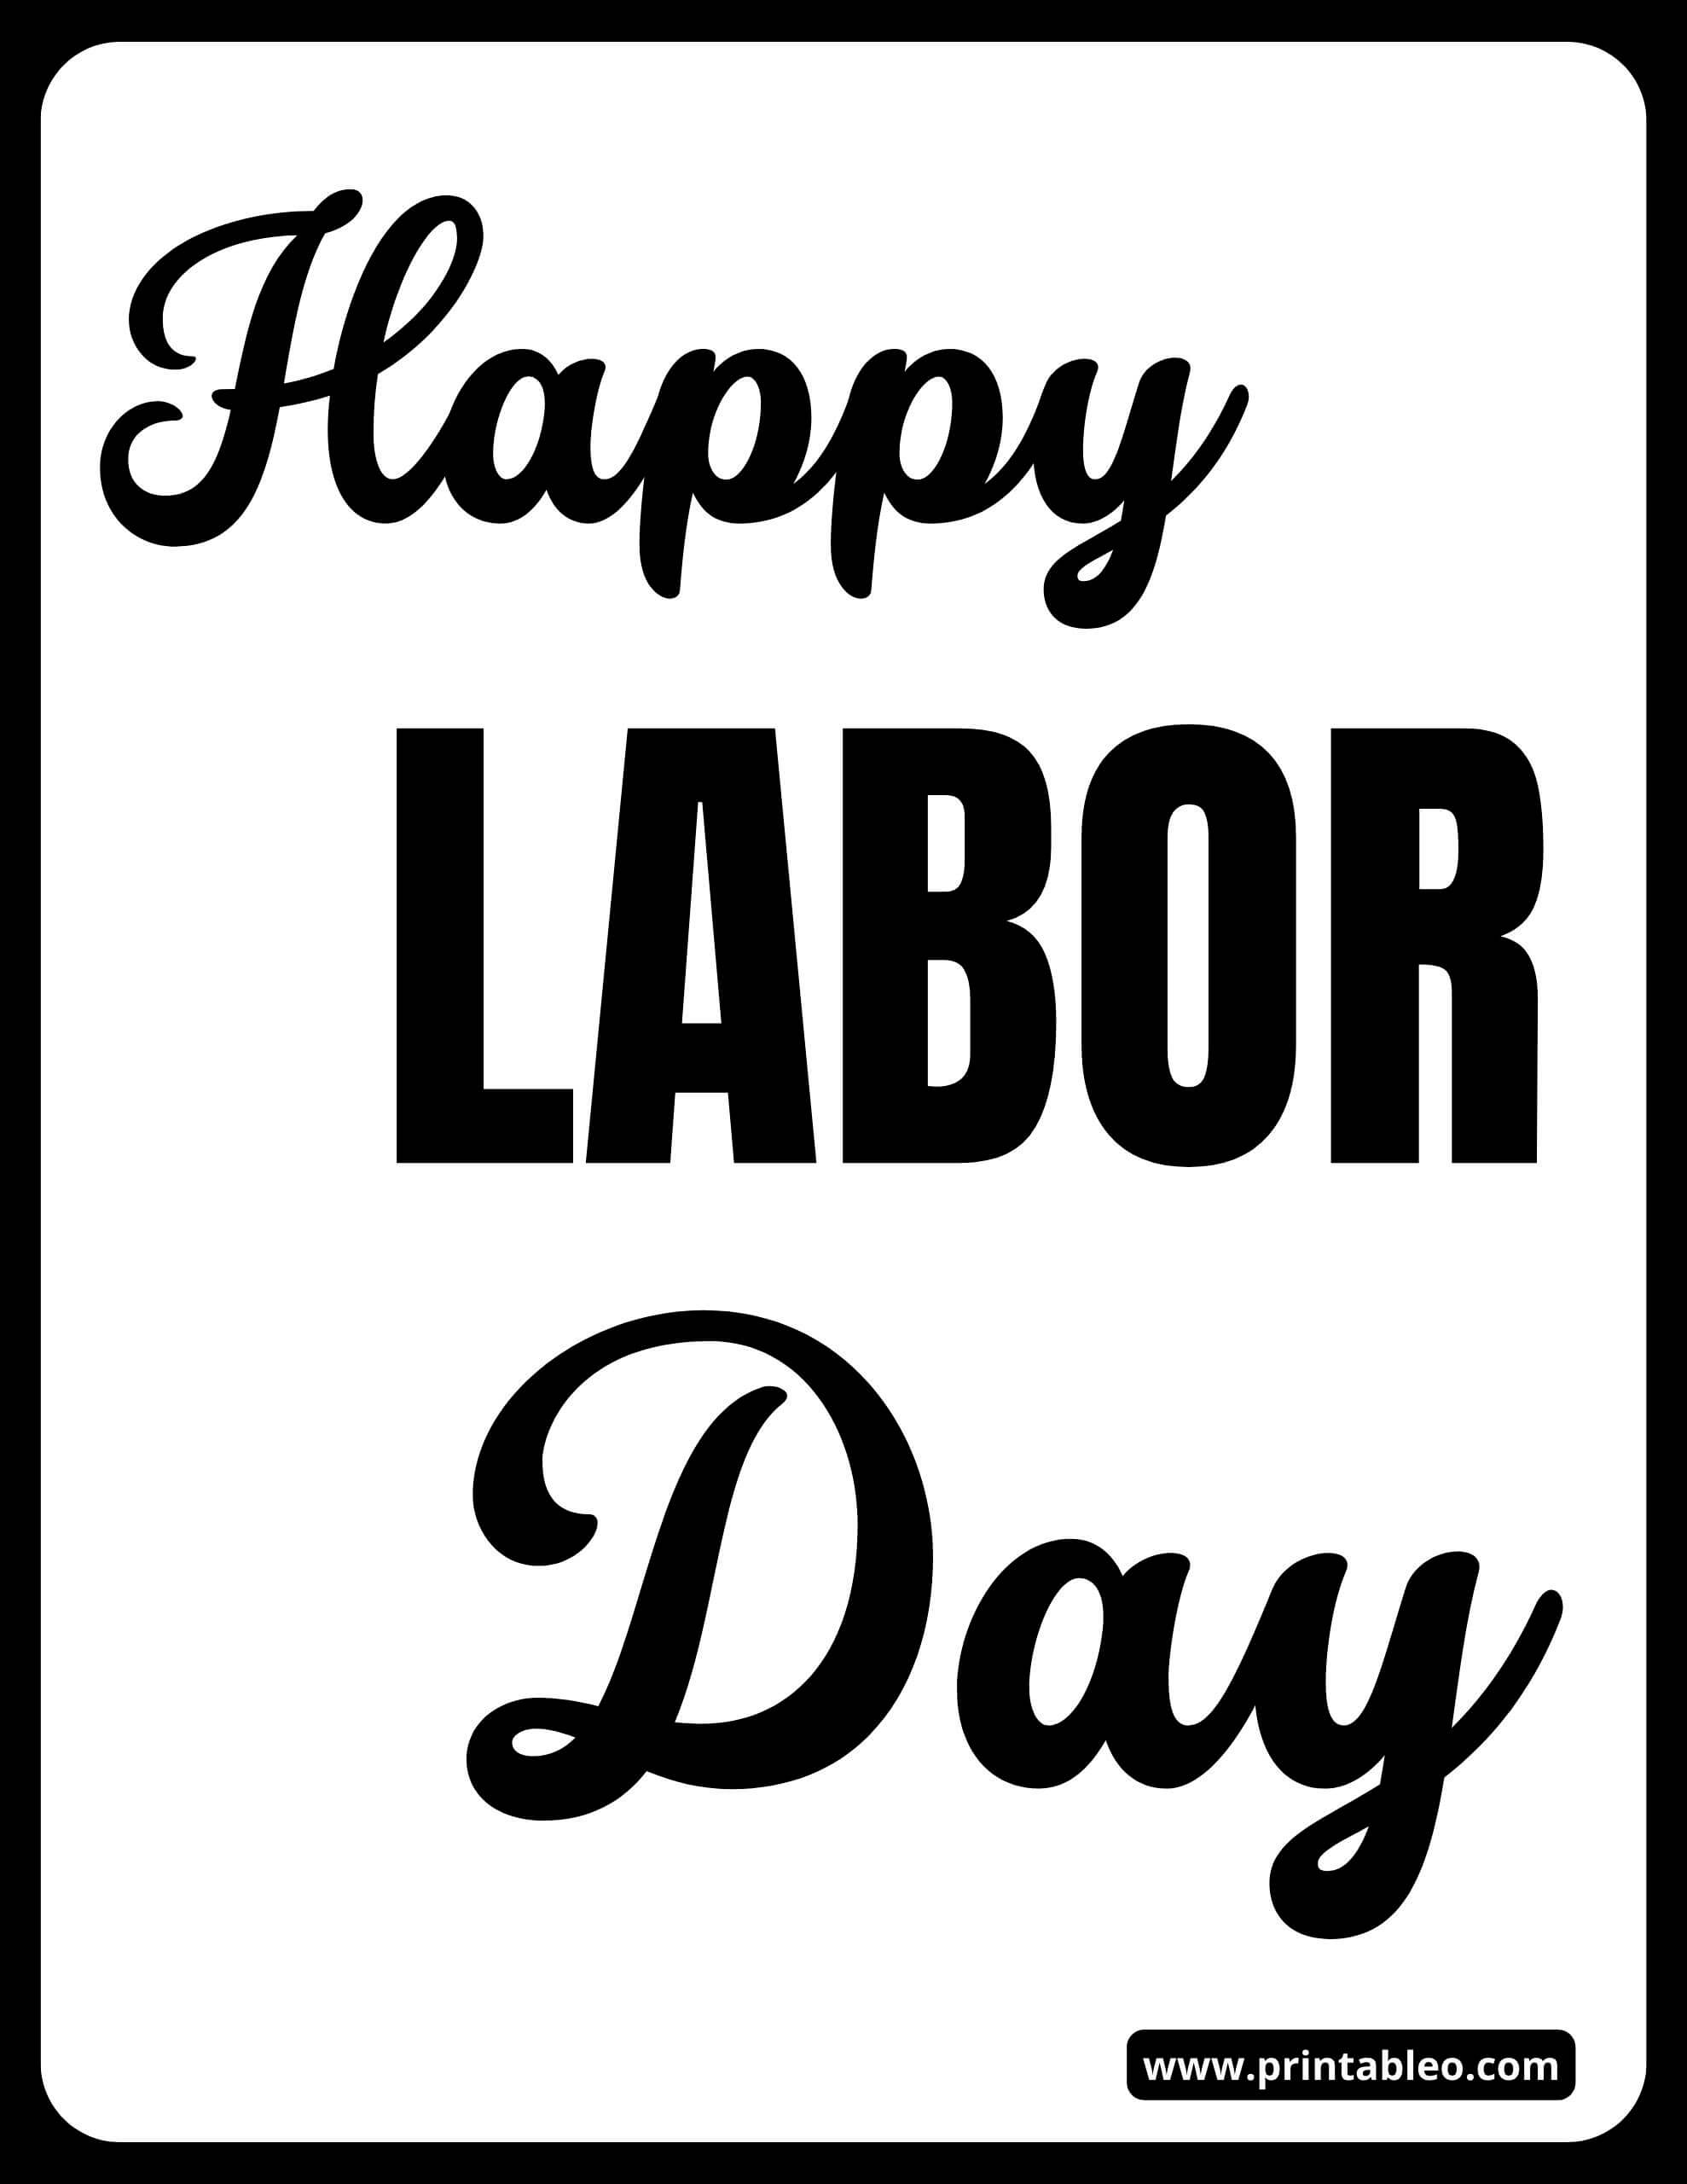 20-printable-labor-day-signs-open-closed-celebration-sign